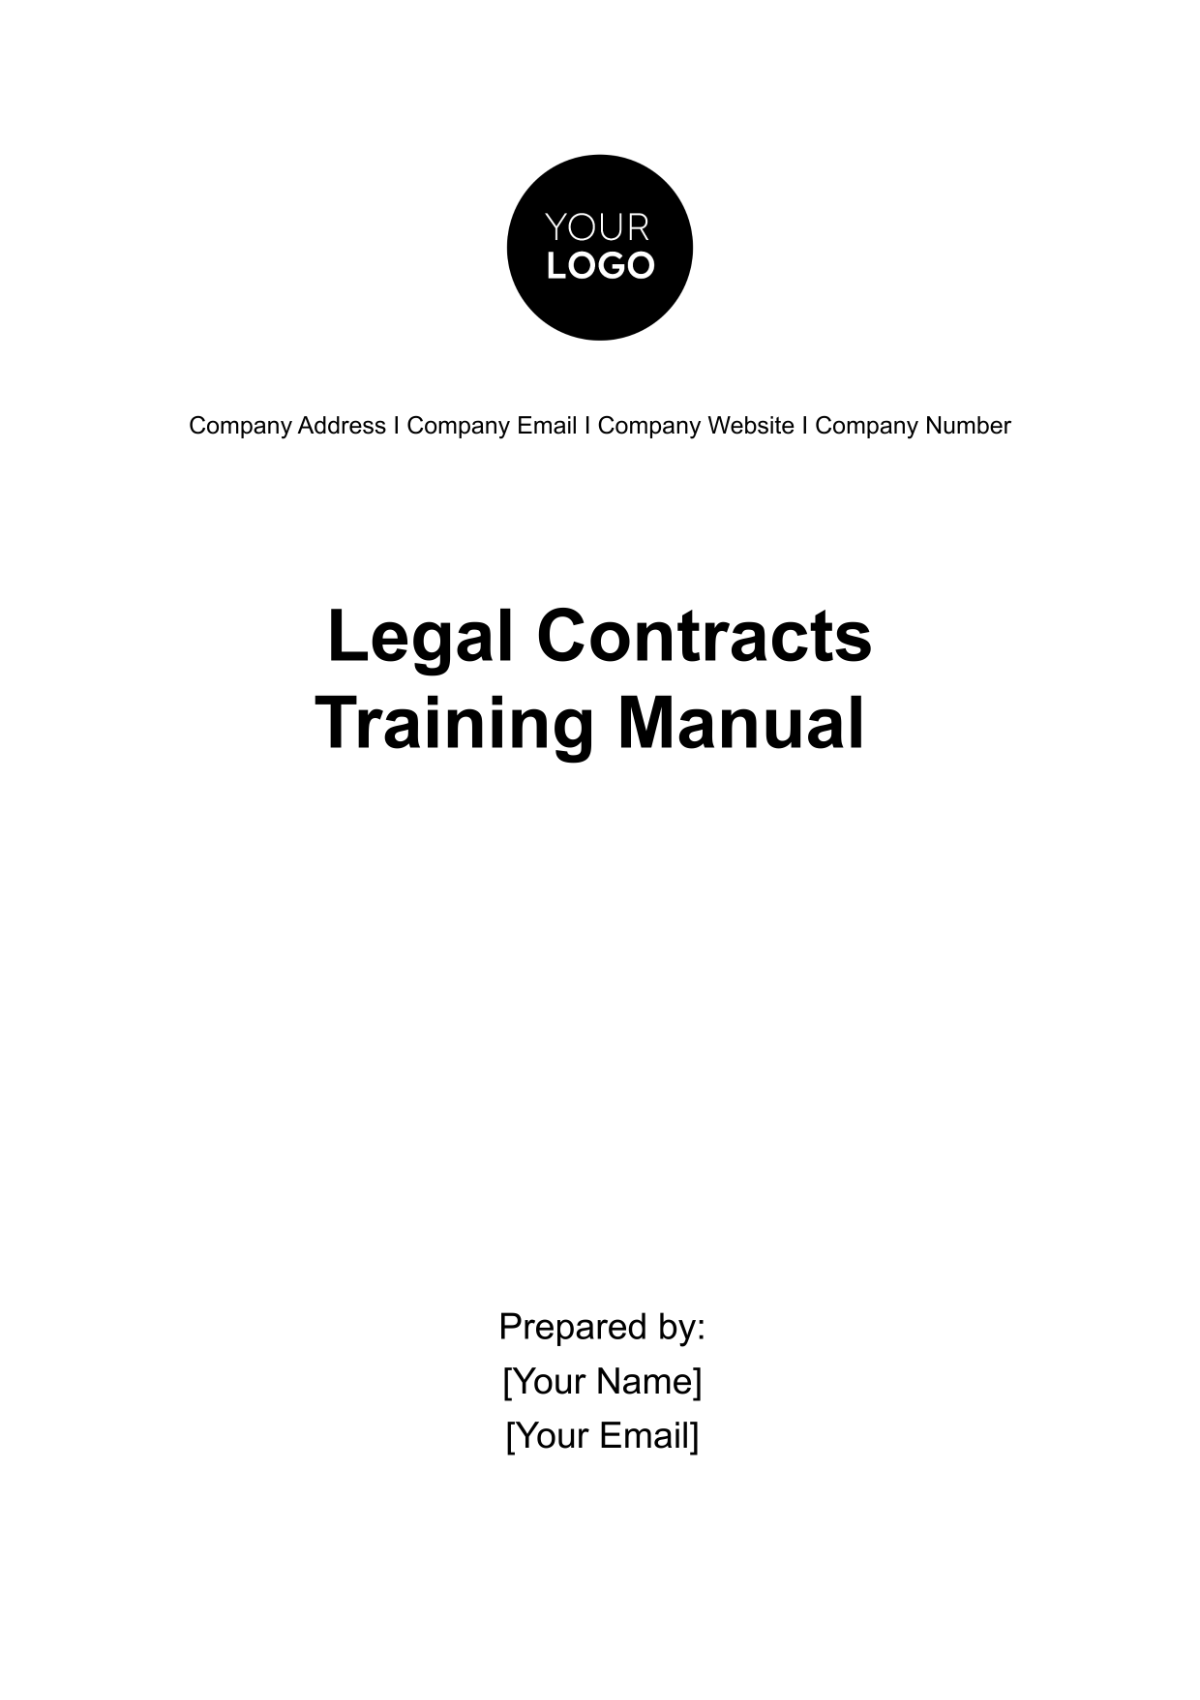 Legal Contracts Training Manual Template